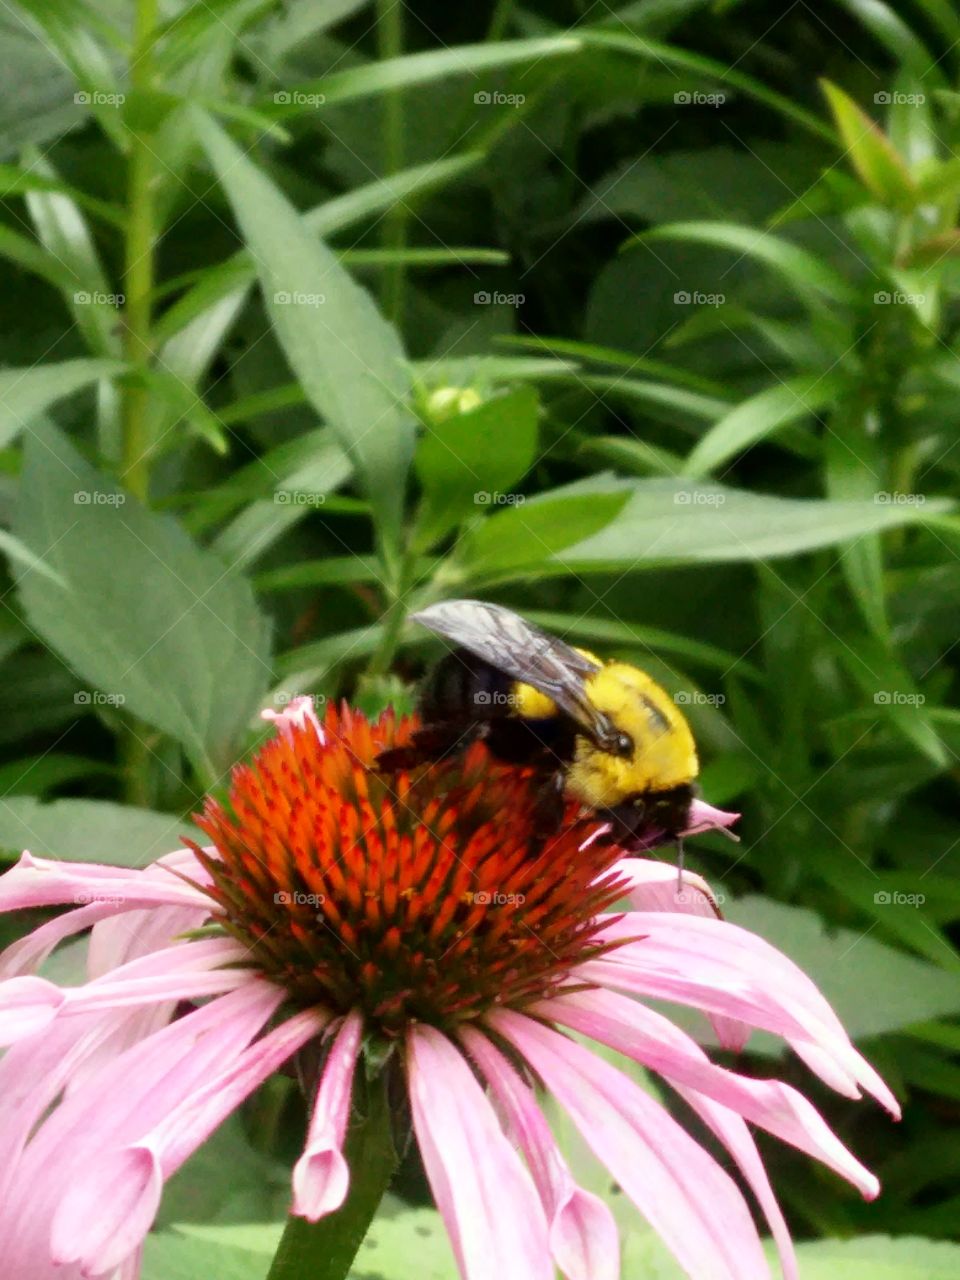 Bumble Bee. flower garden in my yard with bumble bee